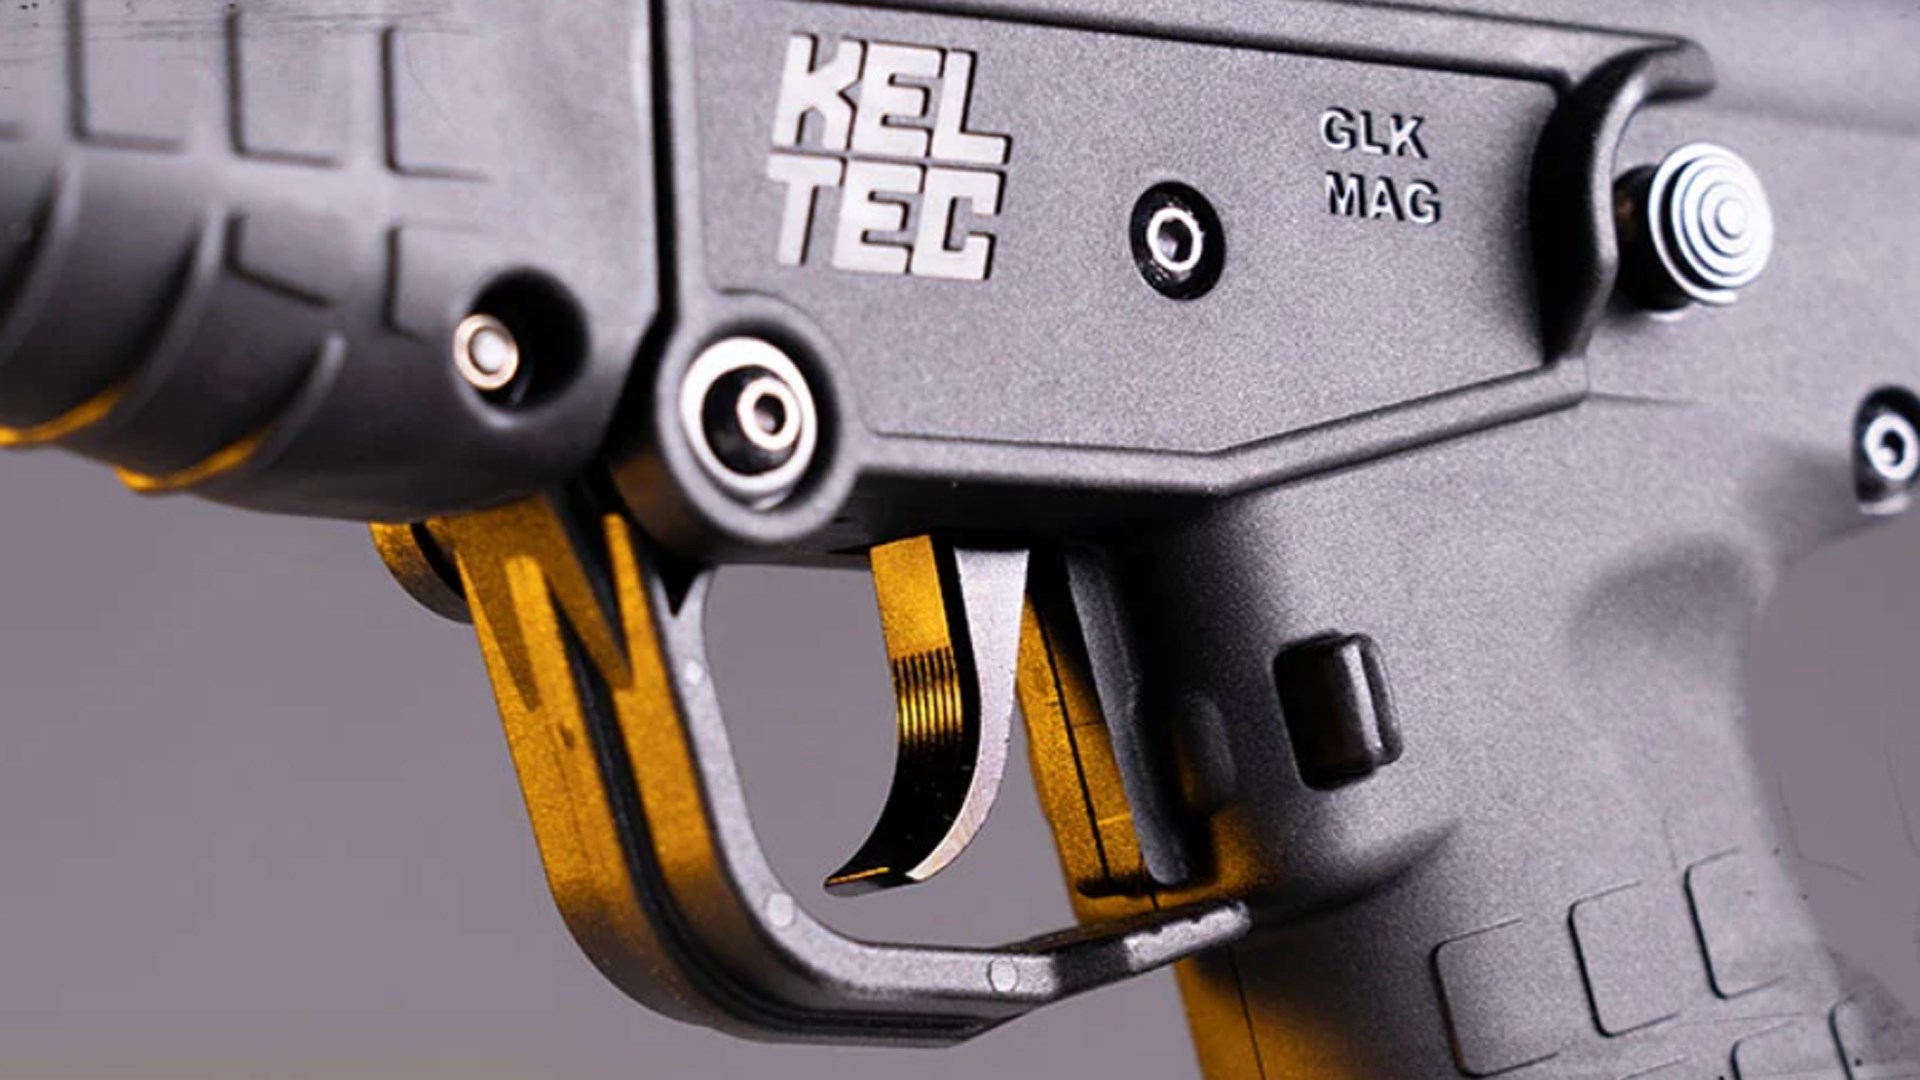 Trigger and magazine release on the KelTec SUB2000 Gen3 carbine.